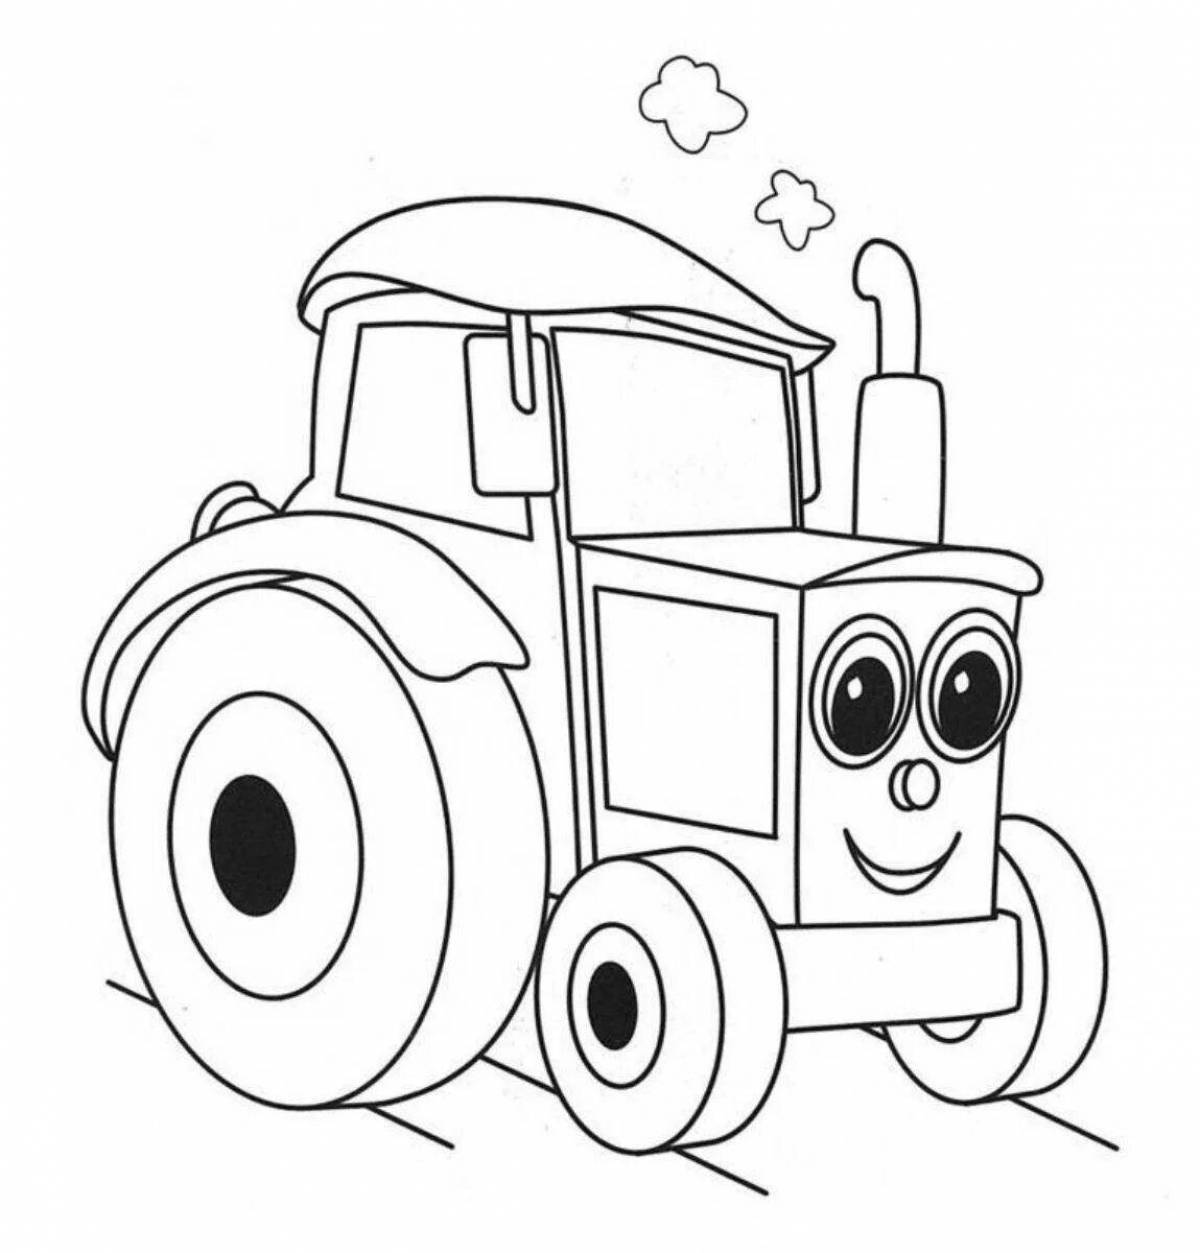 Fun car coloring pages for 4 year olds